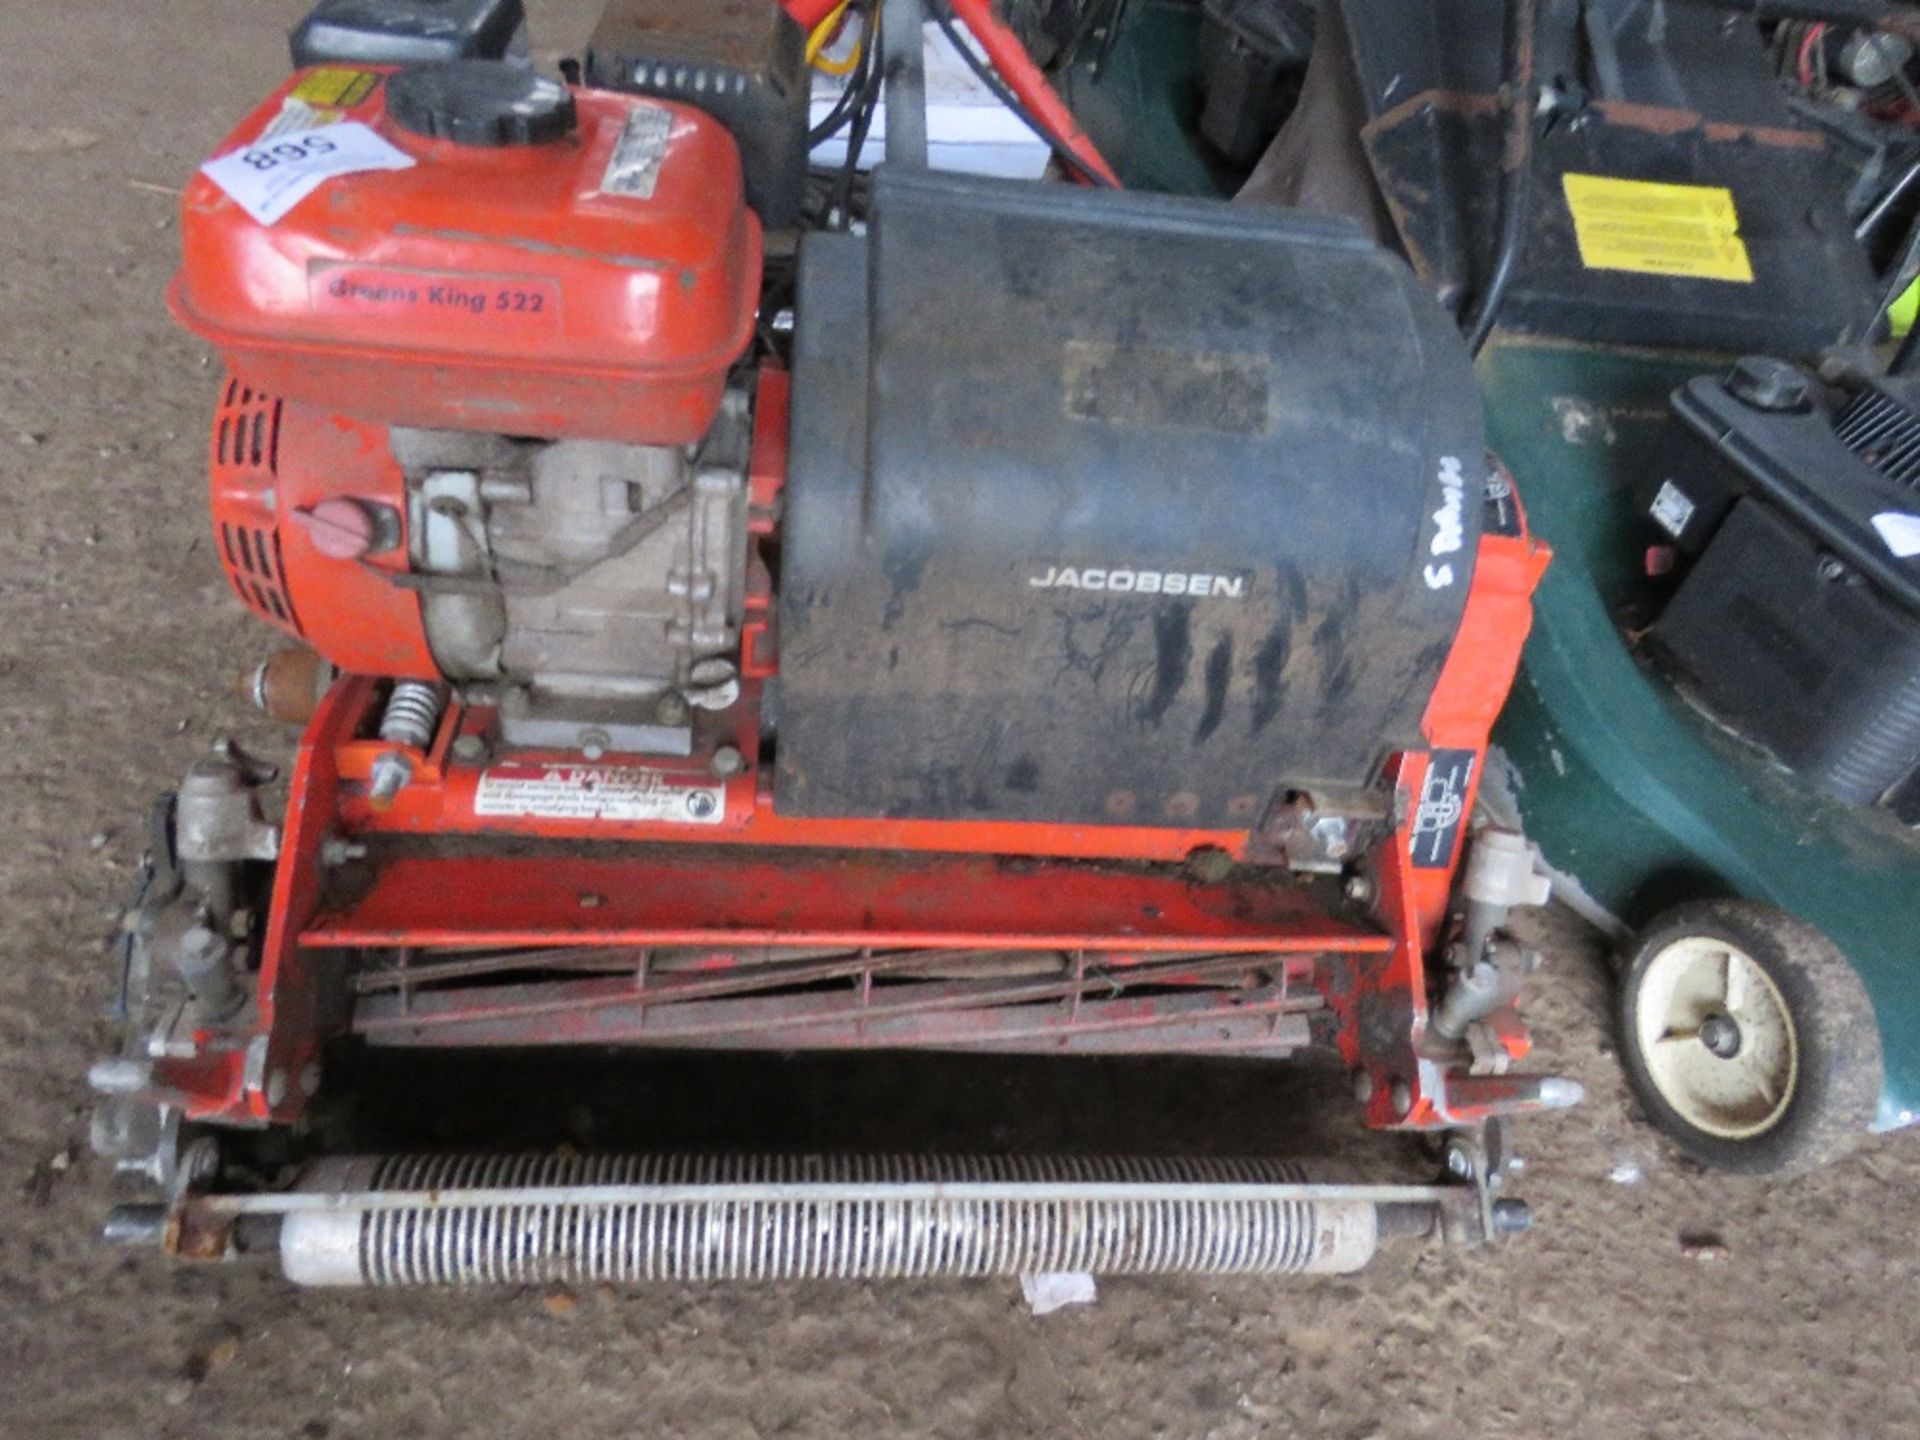 JACOBSEN PETROL ENGINED GREEN KING 522 CYLINDER LAWN MOWERN HONDA ENGINE, NO BOX. THIS LOT IS SOL - Image 2 of 4